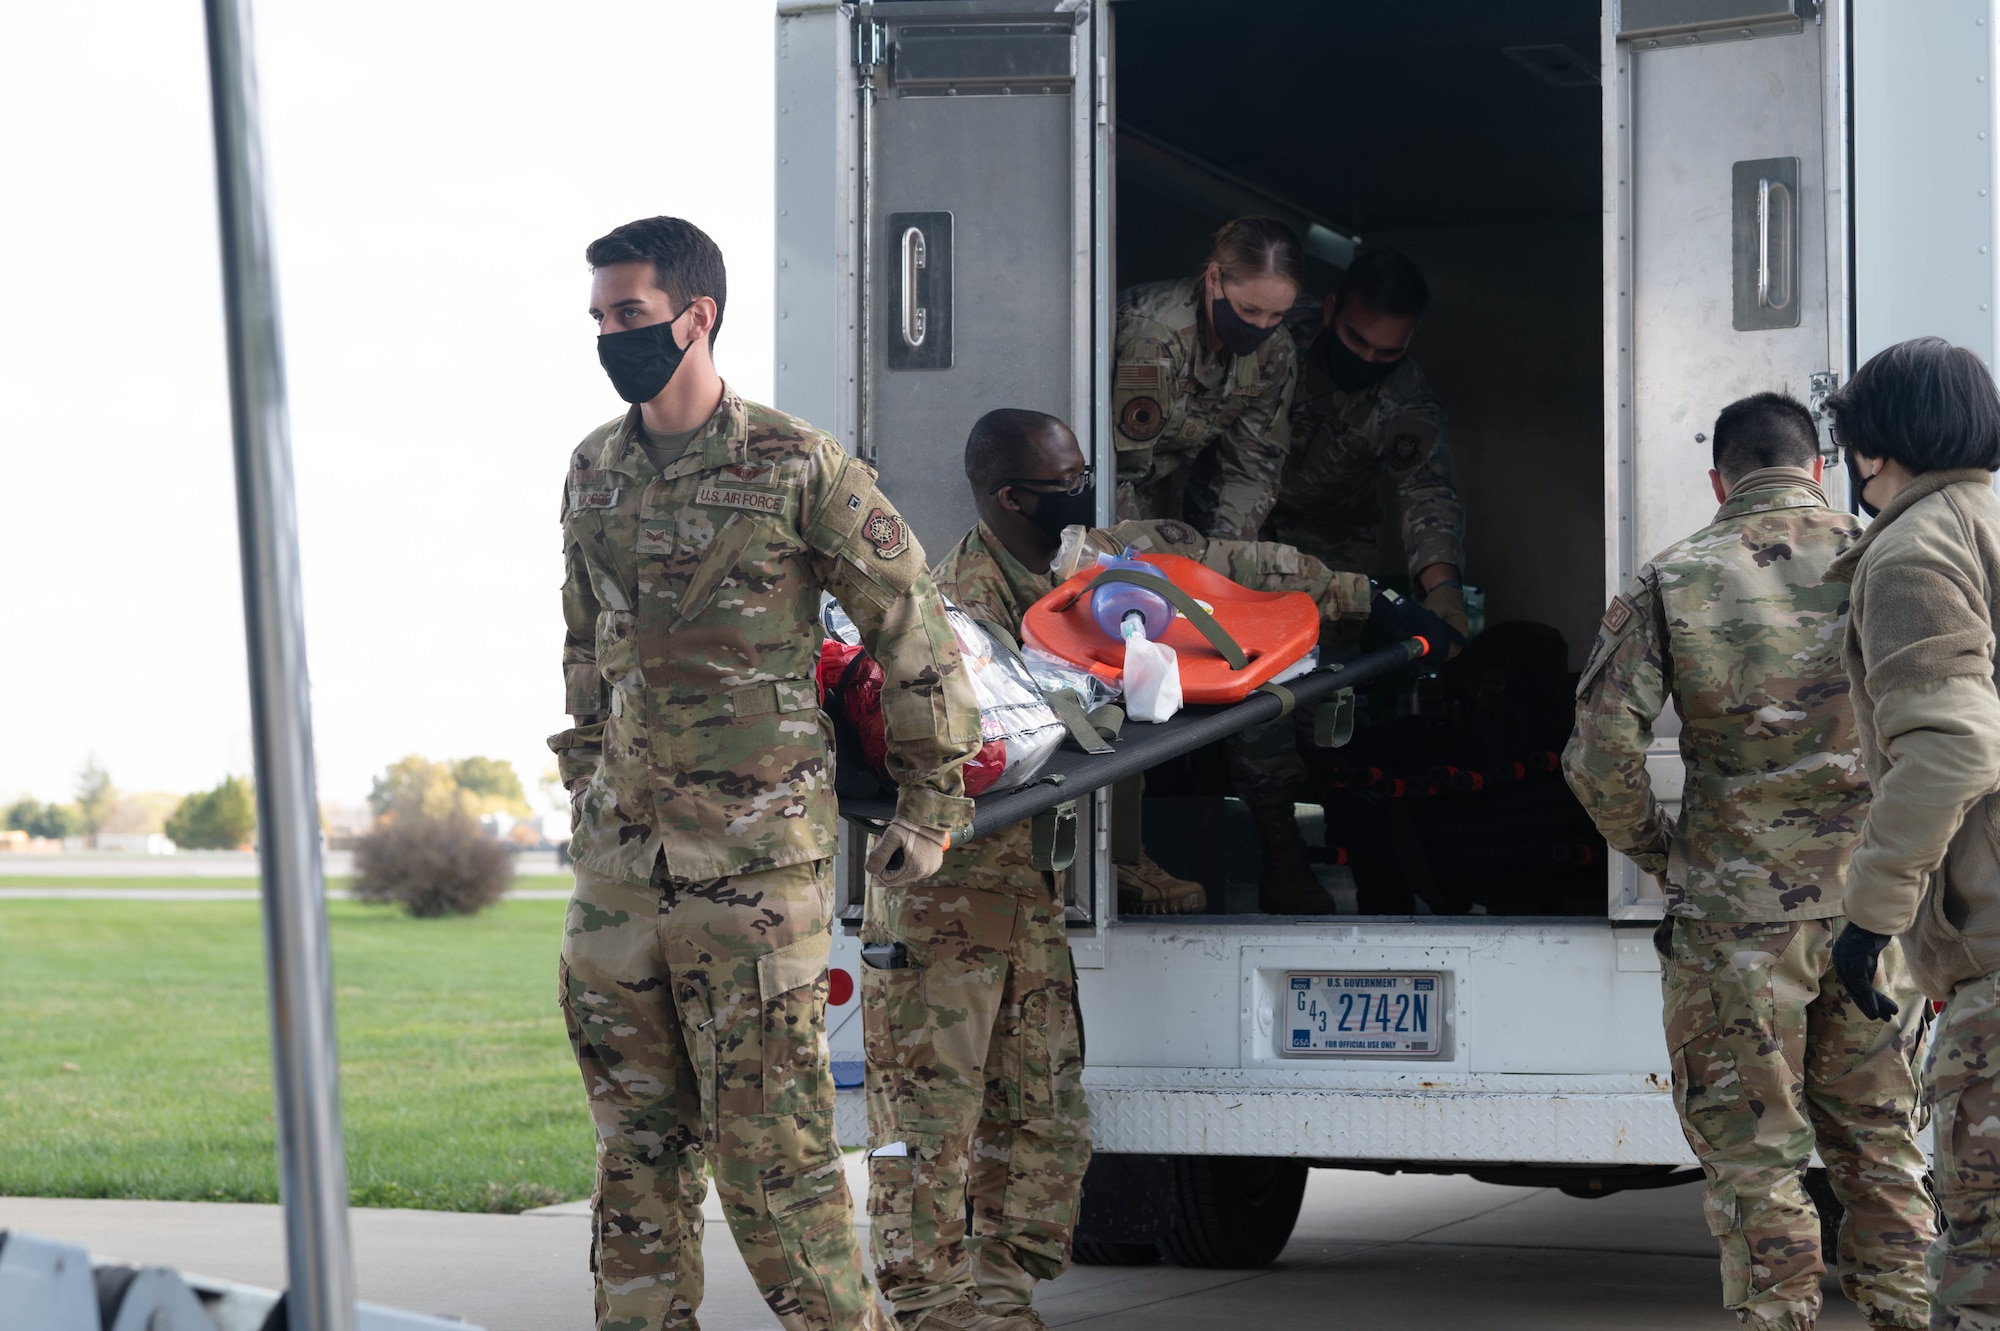 Airmen from the 375th Aeromedical Evacuation Squadron unload medical equipment during an exercise on Scott Air Force Base, Illinois, Nov. 3, 2021. Aeromedical evacuation is designed to take members from a deployed location to the next higher echelon of care. (U.S. Air Force photo by Airman 1st Class Stephanie Henry)